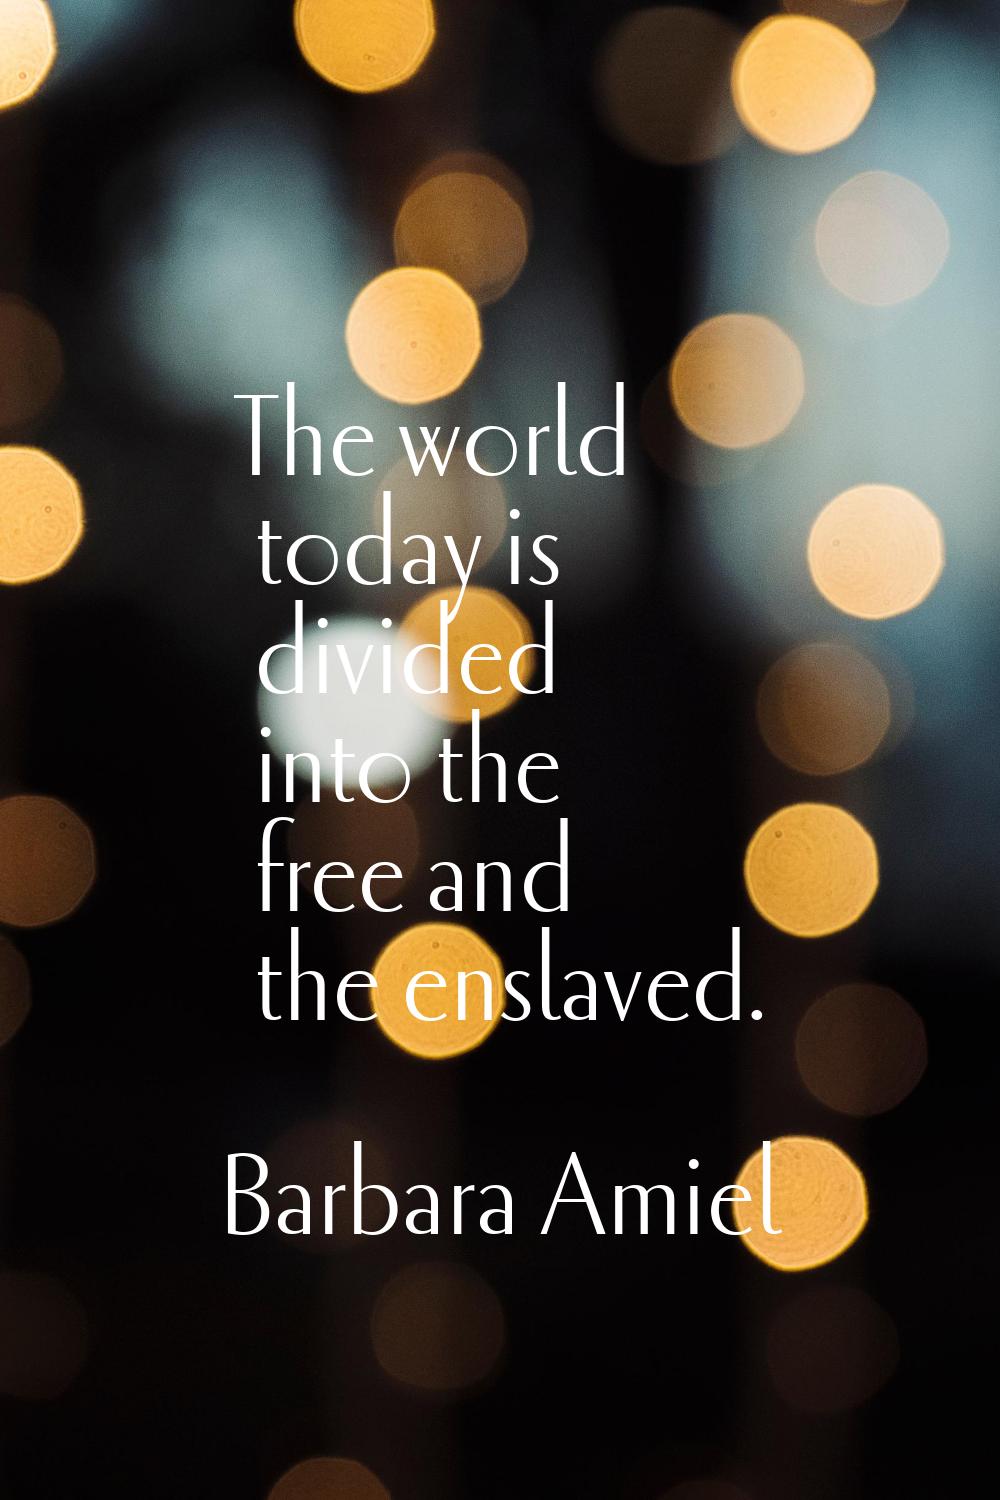 The world today is divided into the free and the enslaved.